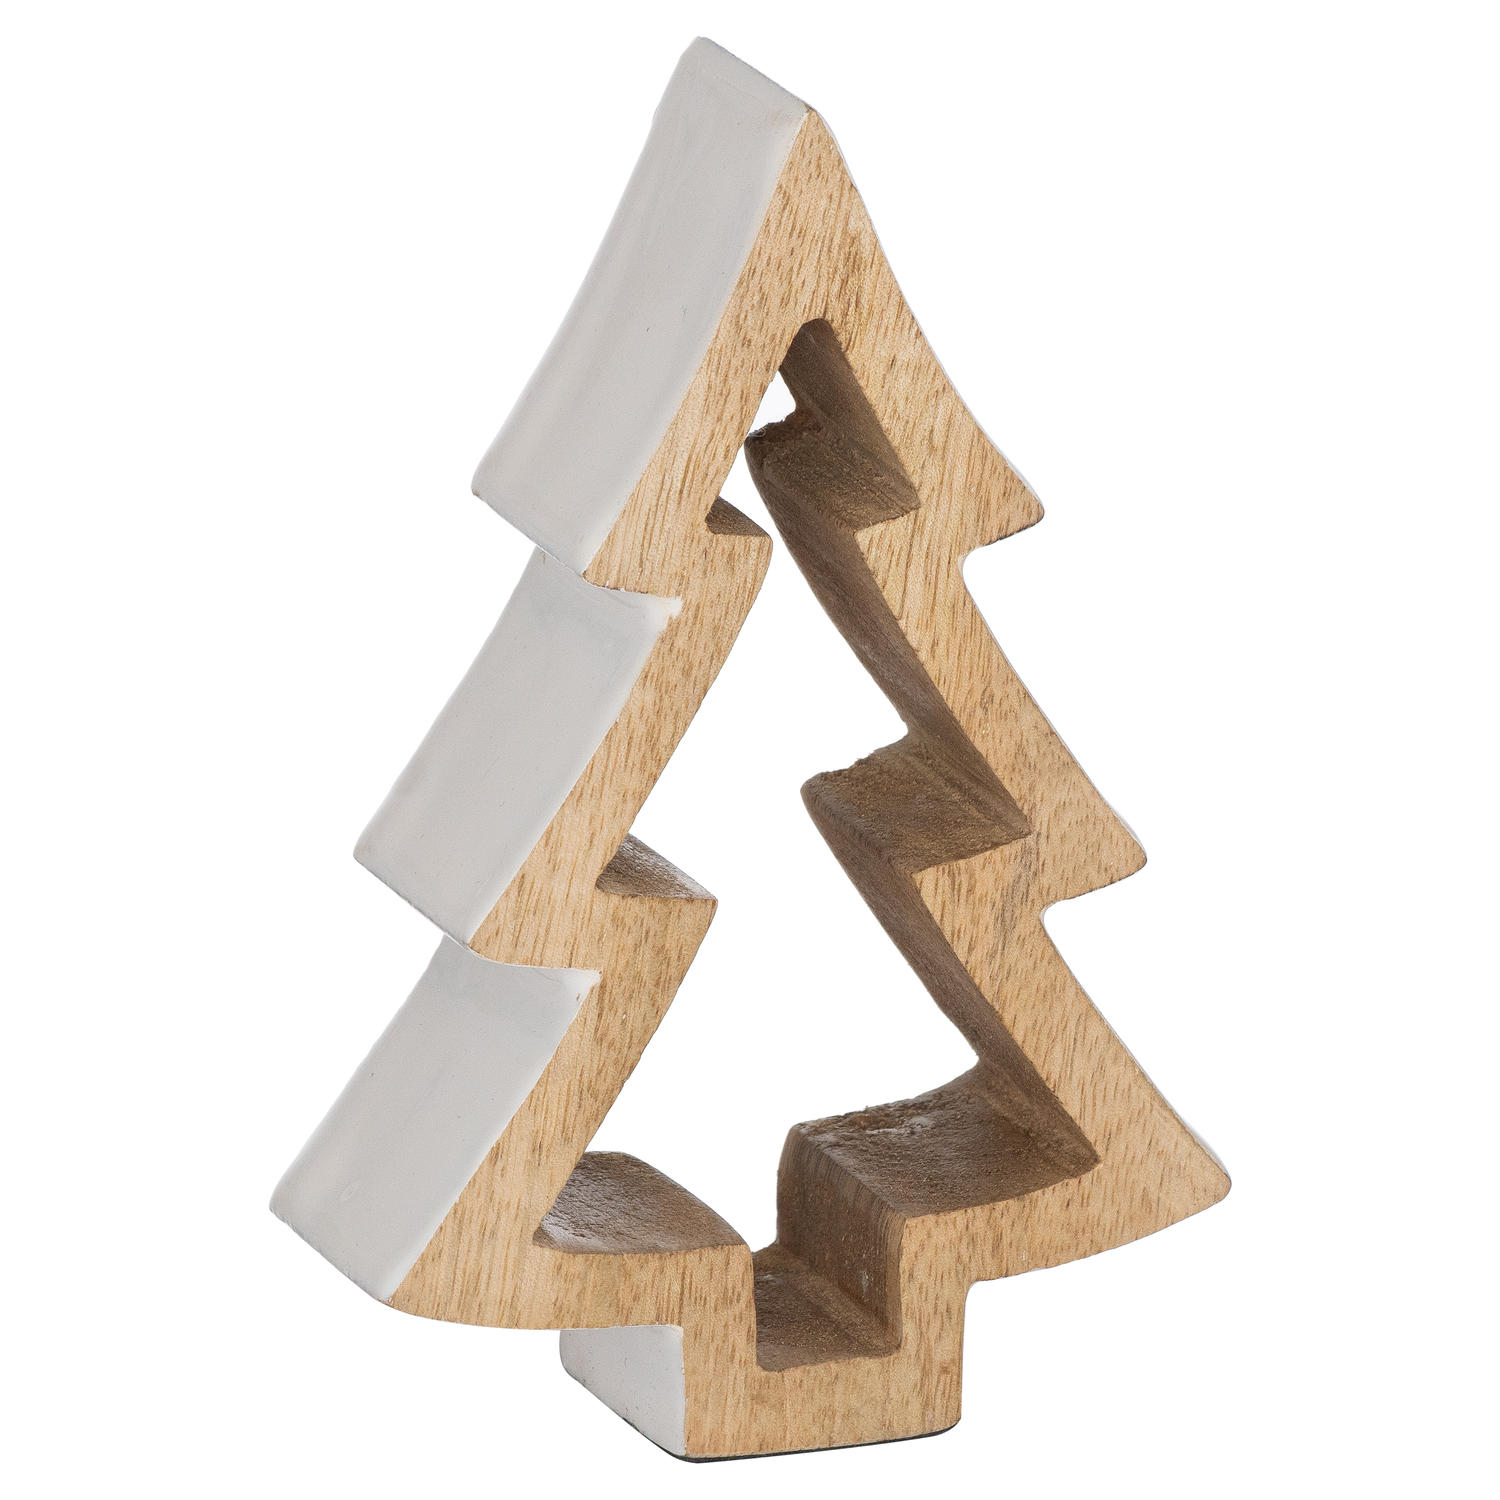 The Noel Collection Snowy Standing Small Wooden Tree - Image 1